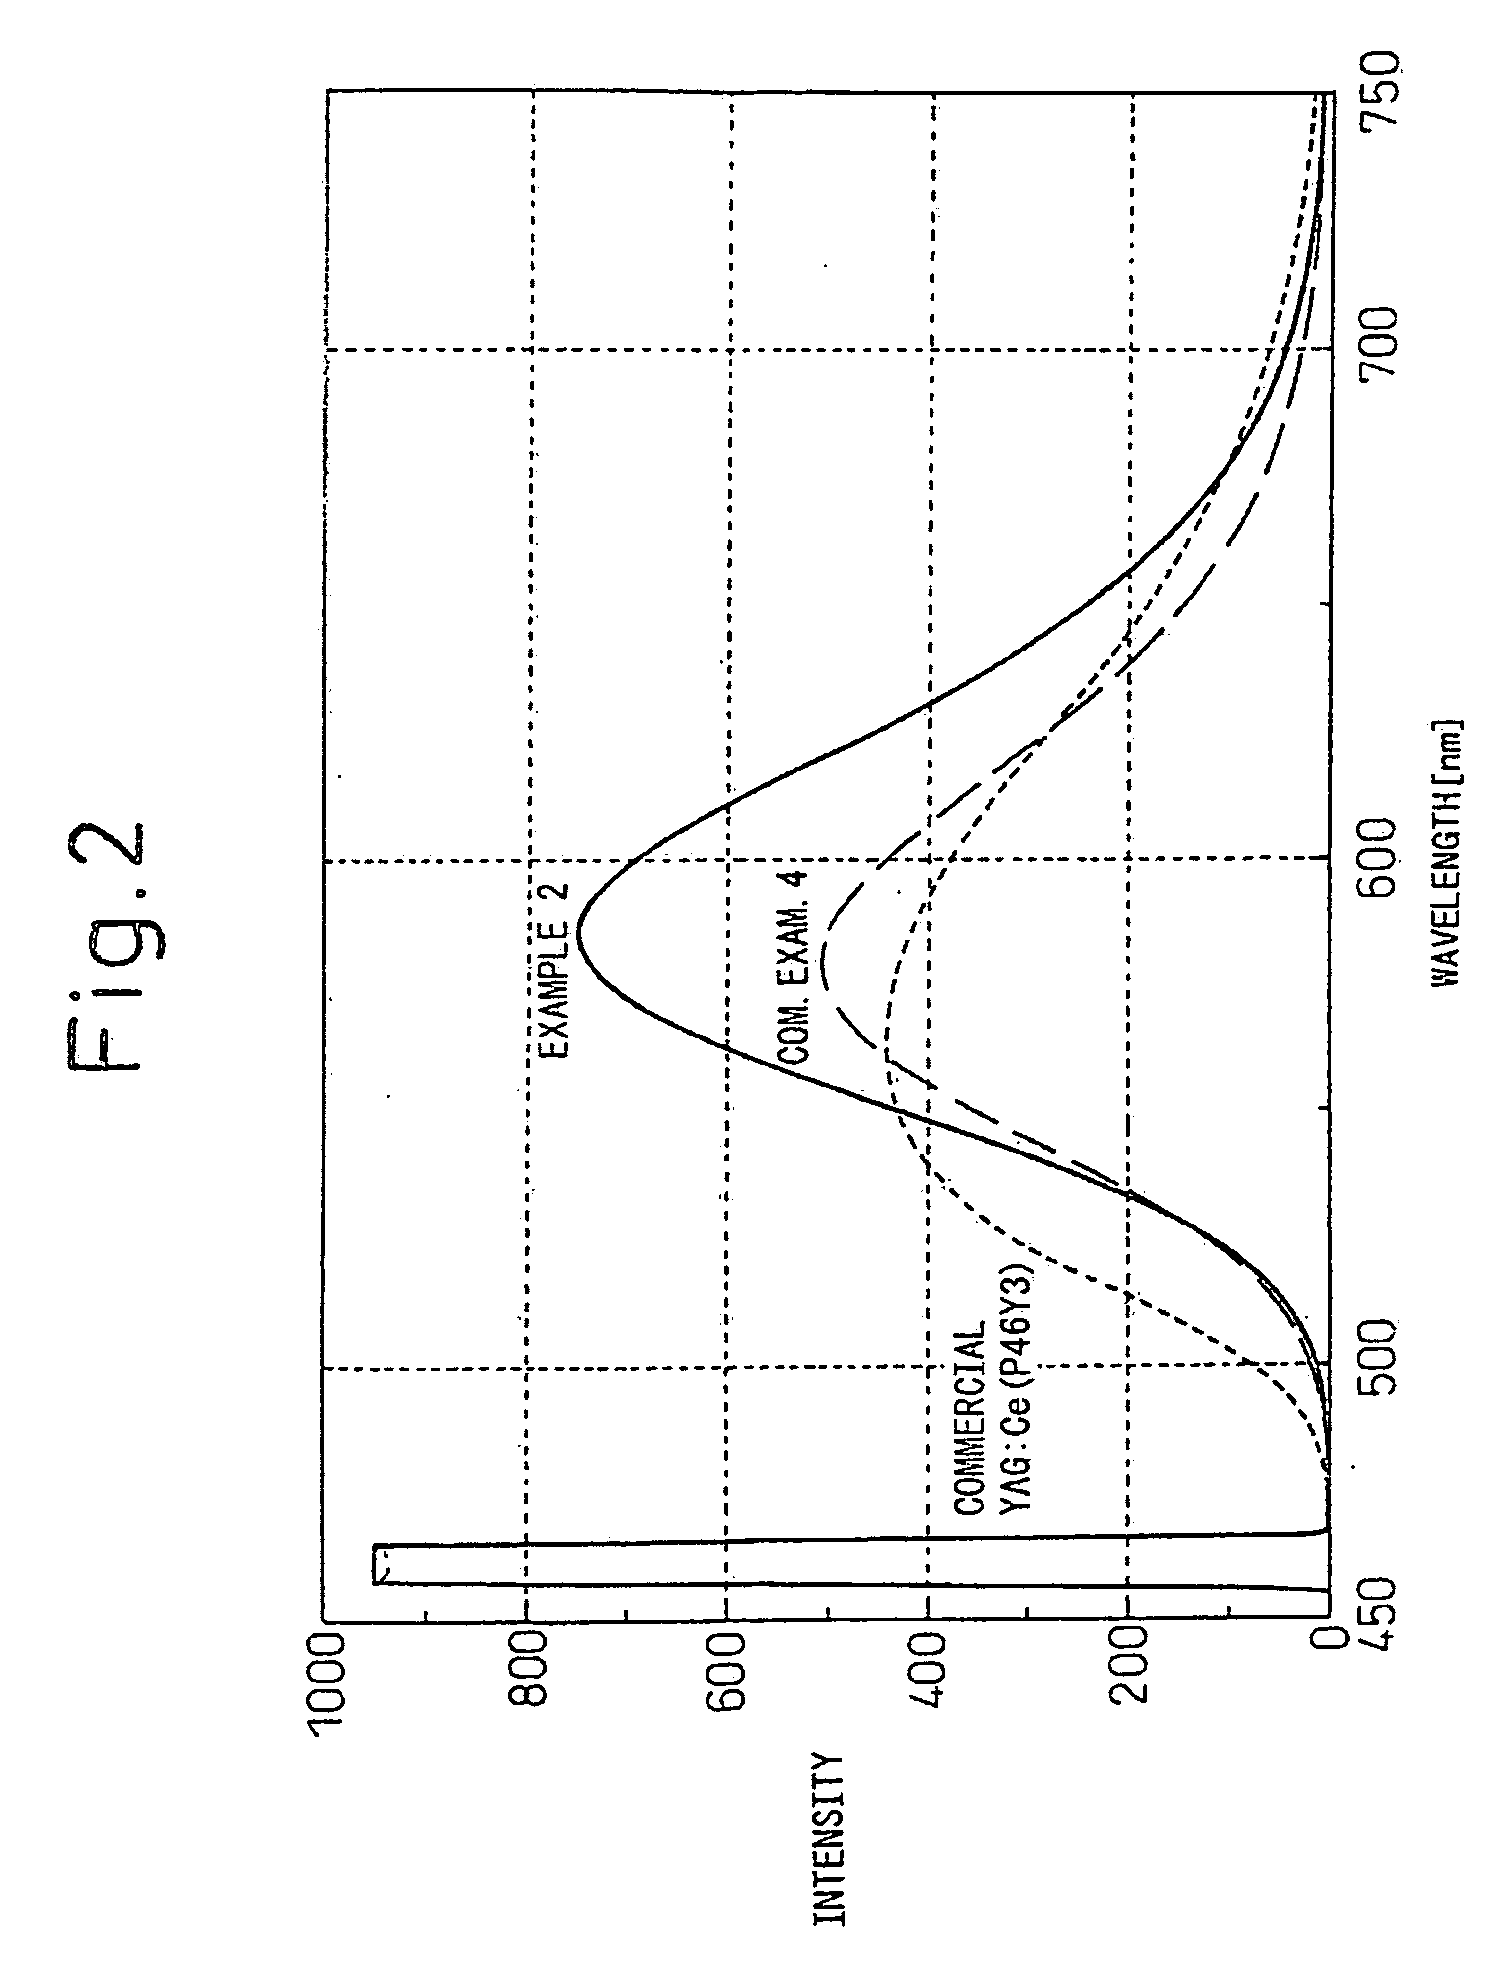 Sialon-based oxynitride phosphor and production method thereof